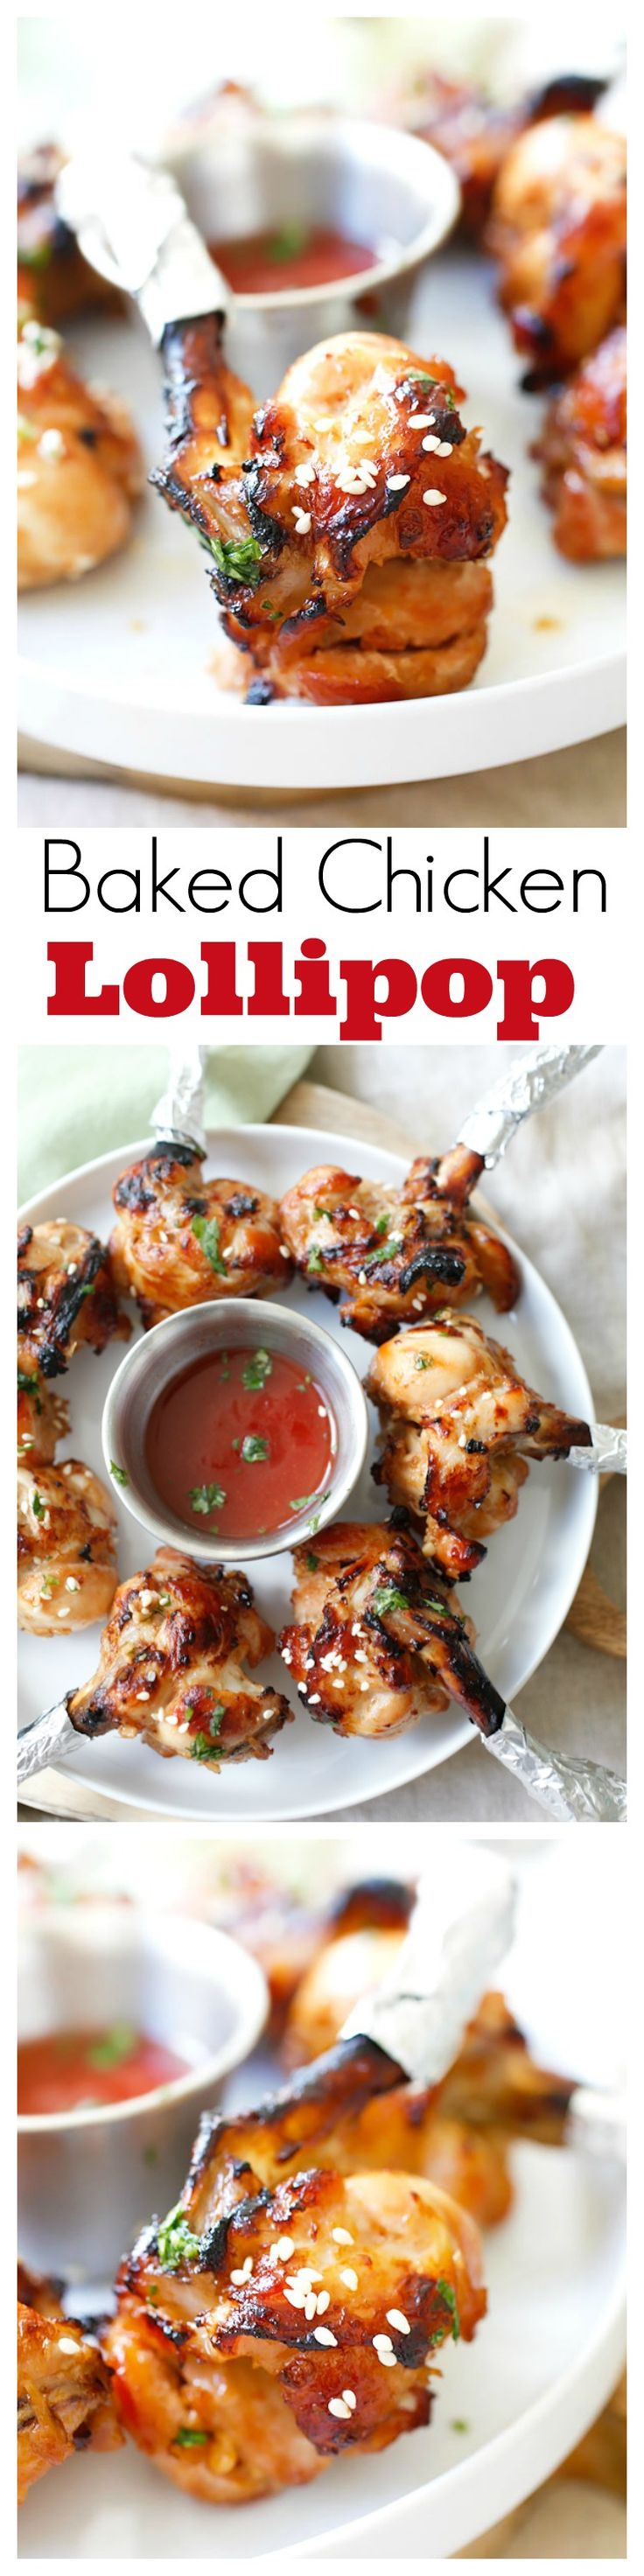 Baked Chicken Lollipop – the most amazing drumette appetizer that is shaped like a lollipop. Marinated with hoisin ginger and baked to juicy deliciousness | rasamalaysia.com